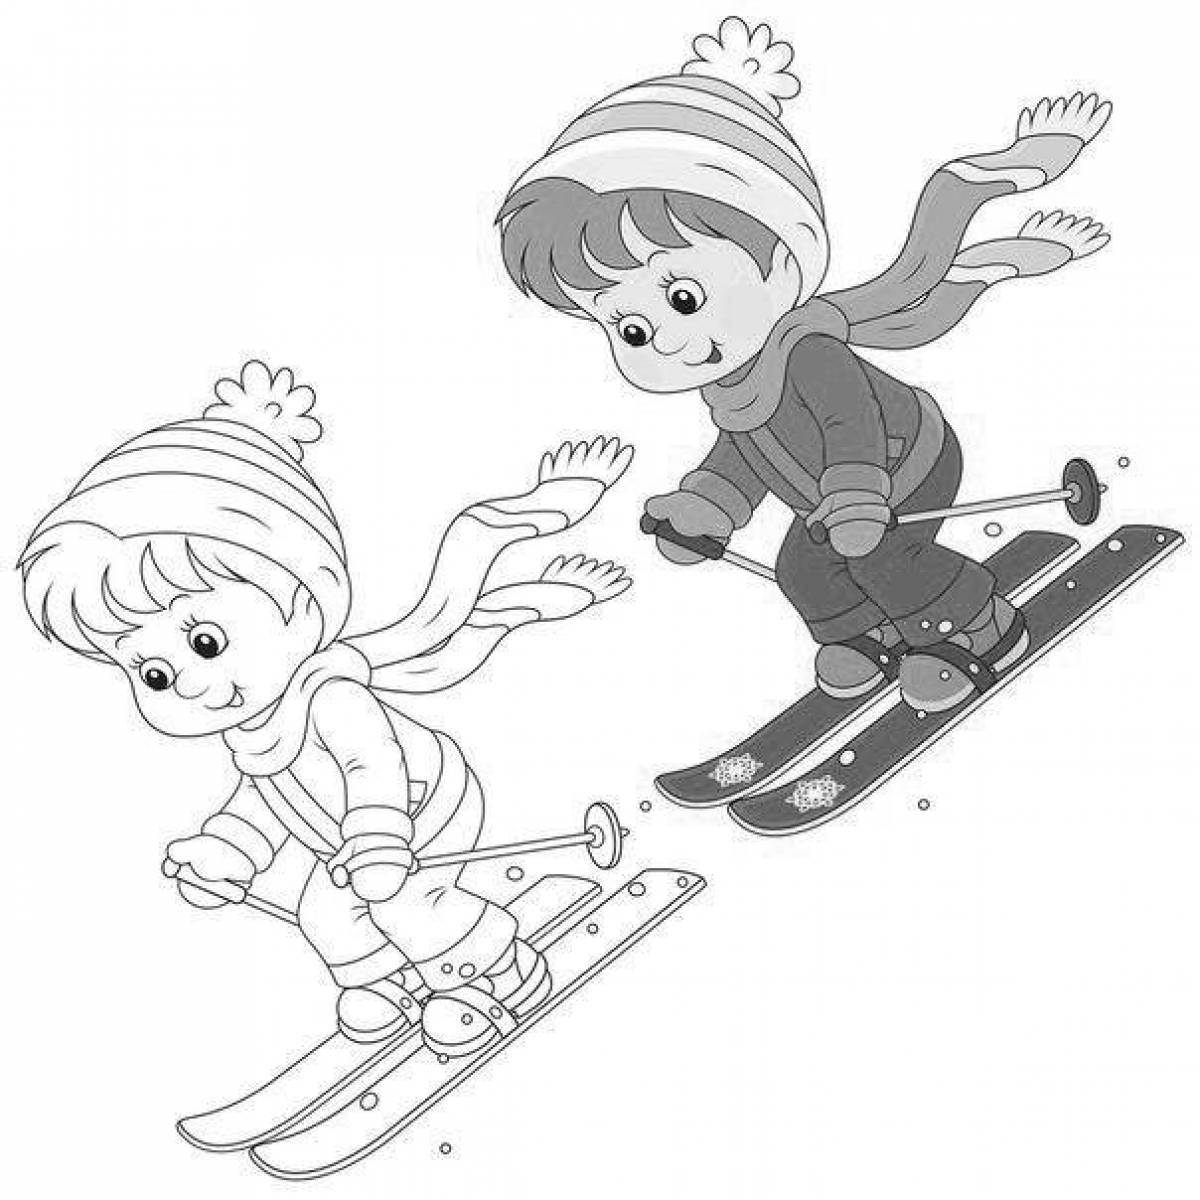 Fascinating coloring book winter sports for preschoolers